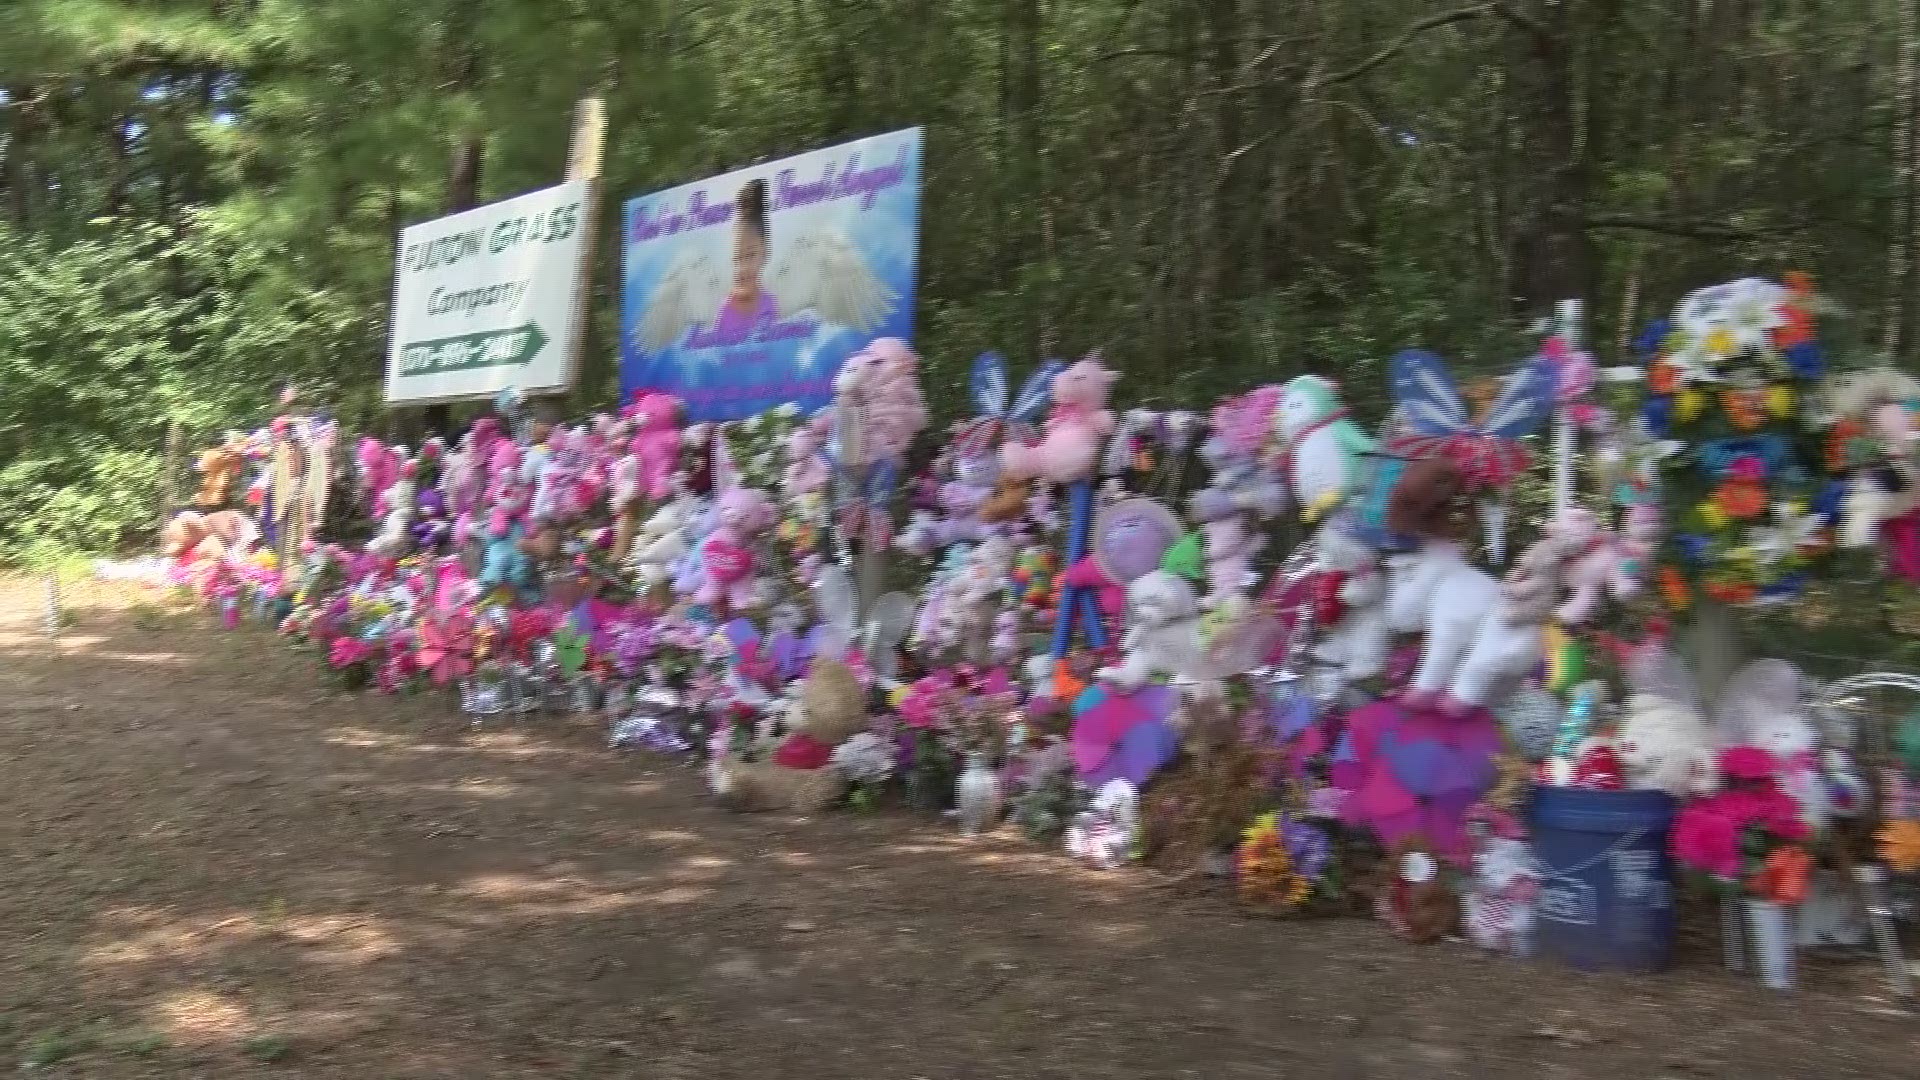 The Arkansas Highway Commission has unanimously approved a proposal to rename a Hempstead County bridge in honor of Maleah Davis. (Video courtesy: KSLA)